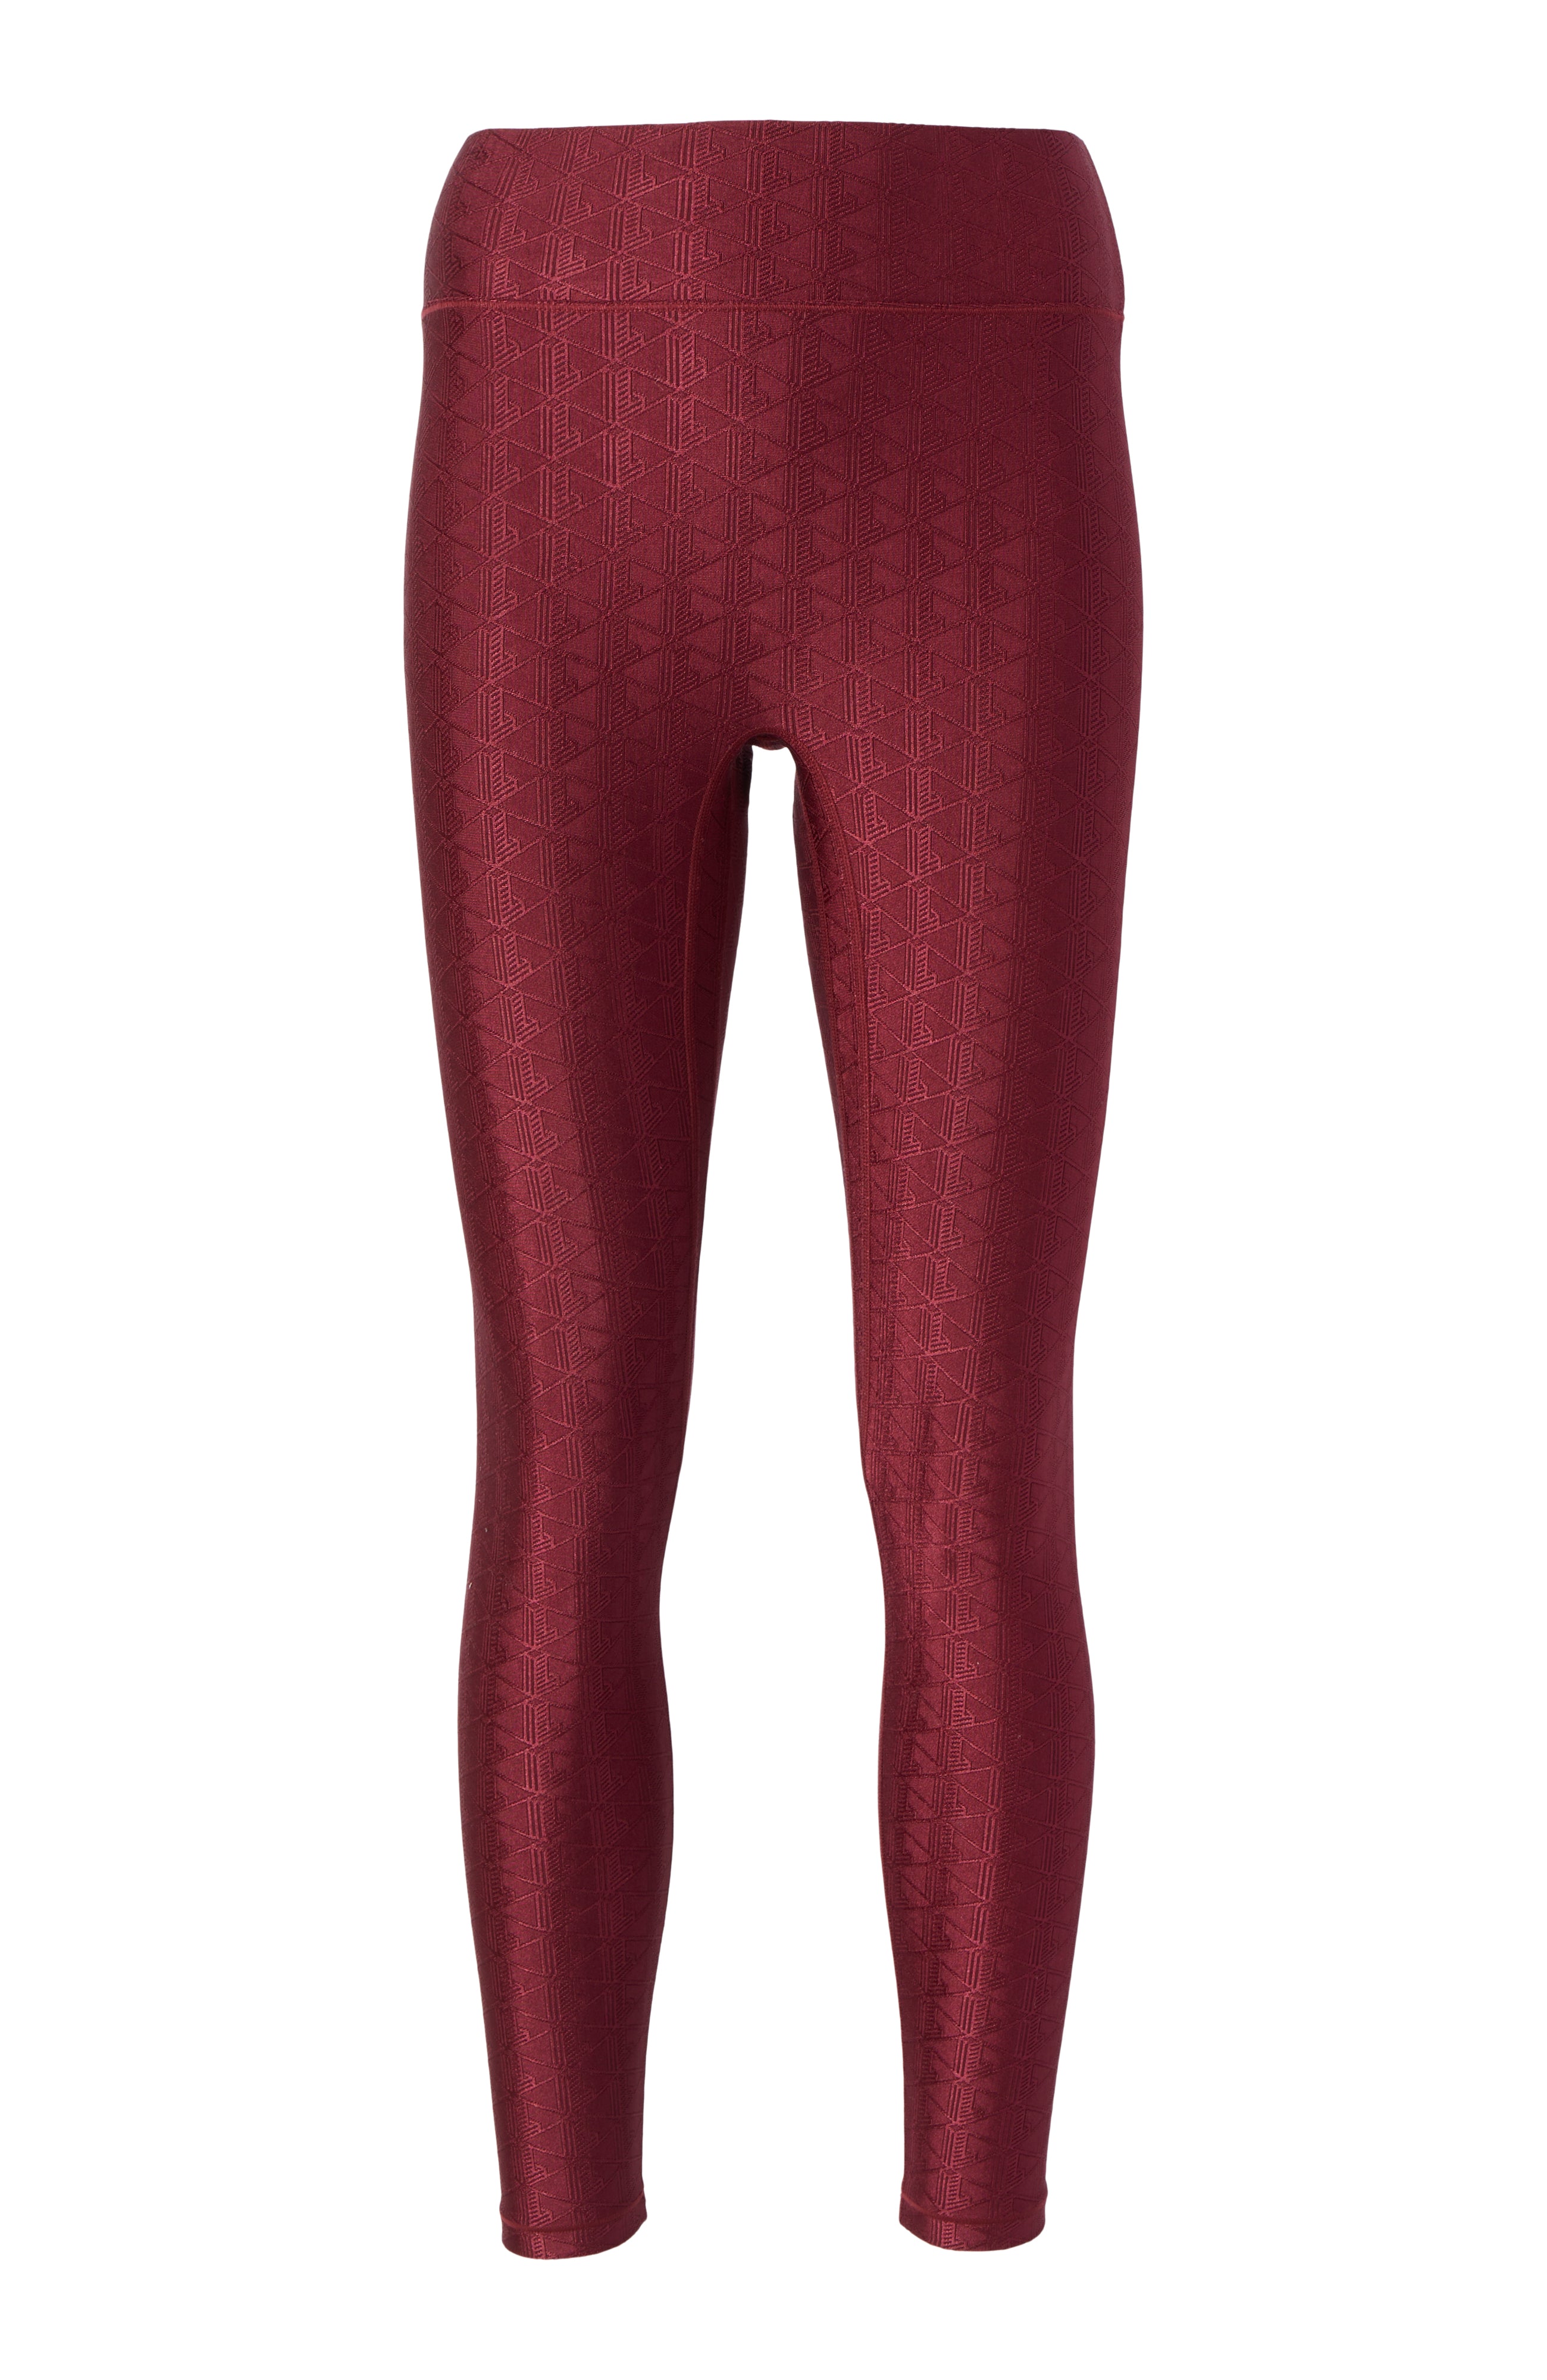 LuLaRoe 3XL LUXE SOLID RED WINE JACQUARD Leggings NWT